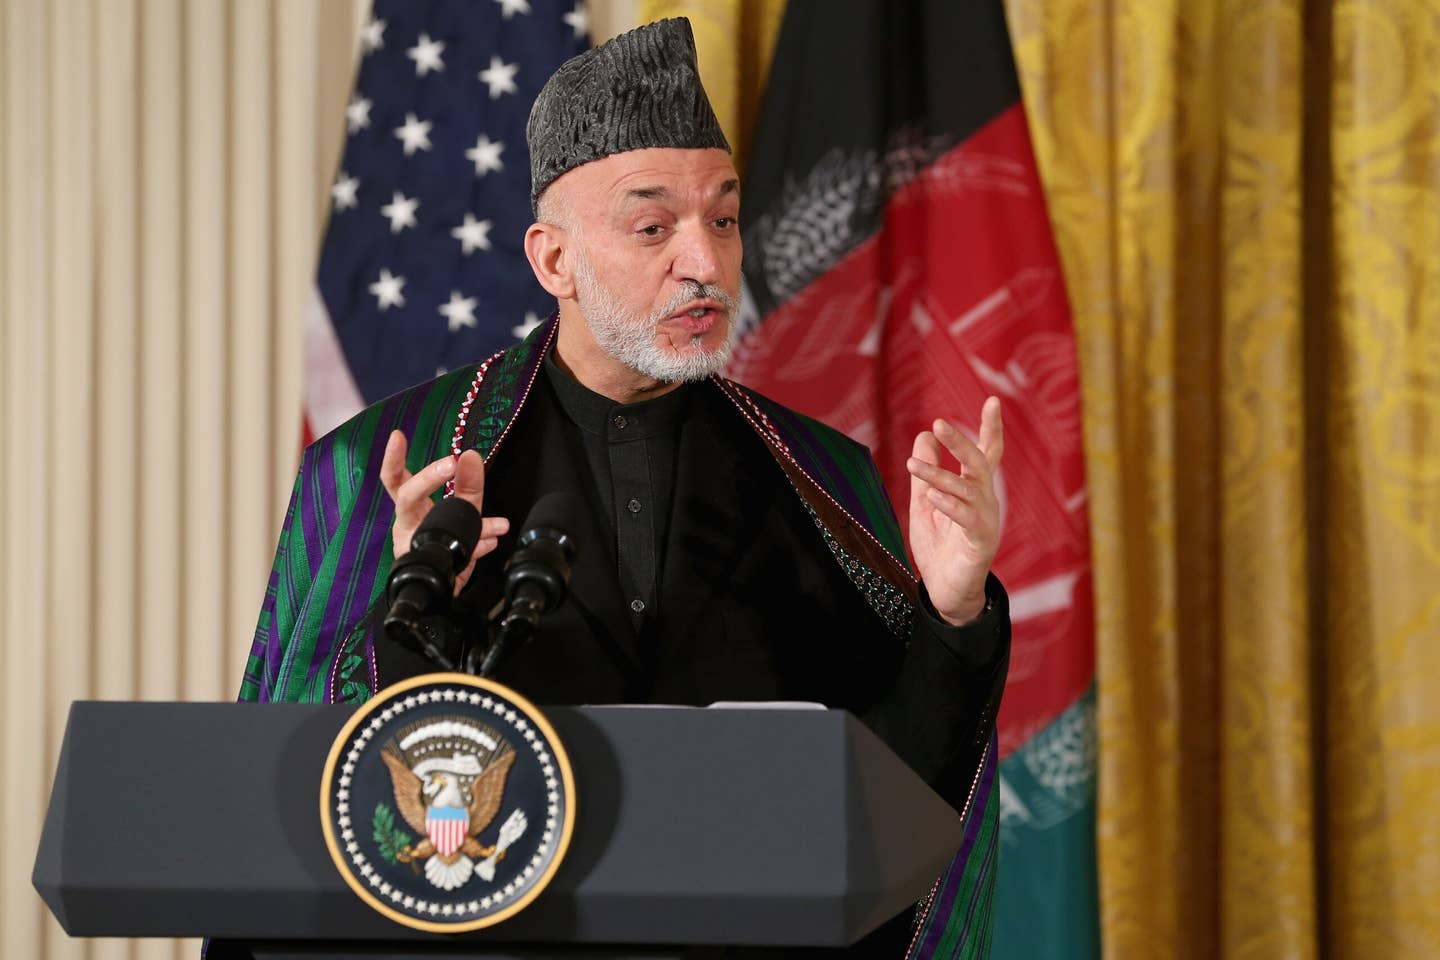 Alizai said he stopped former Afghan President Hamid Karzai from returning to office as the Taliban advanced on Kabul. (Photo by Chip Somodevilla/Getty Images)